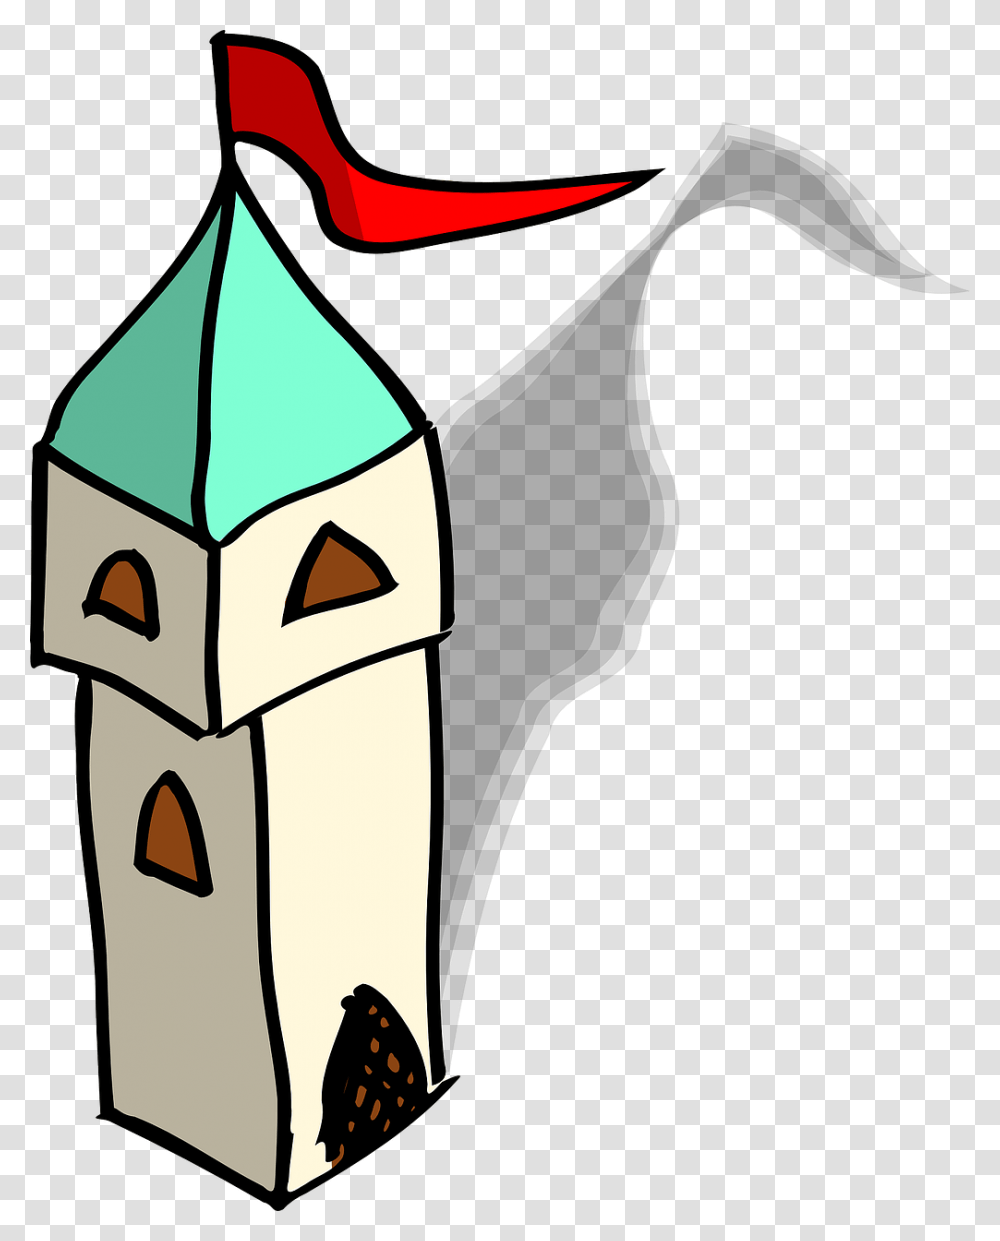 Flying Vector Castle Meaning Of Land Mark, Angry Birds, PEZ Dispenser Transparent Png